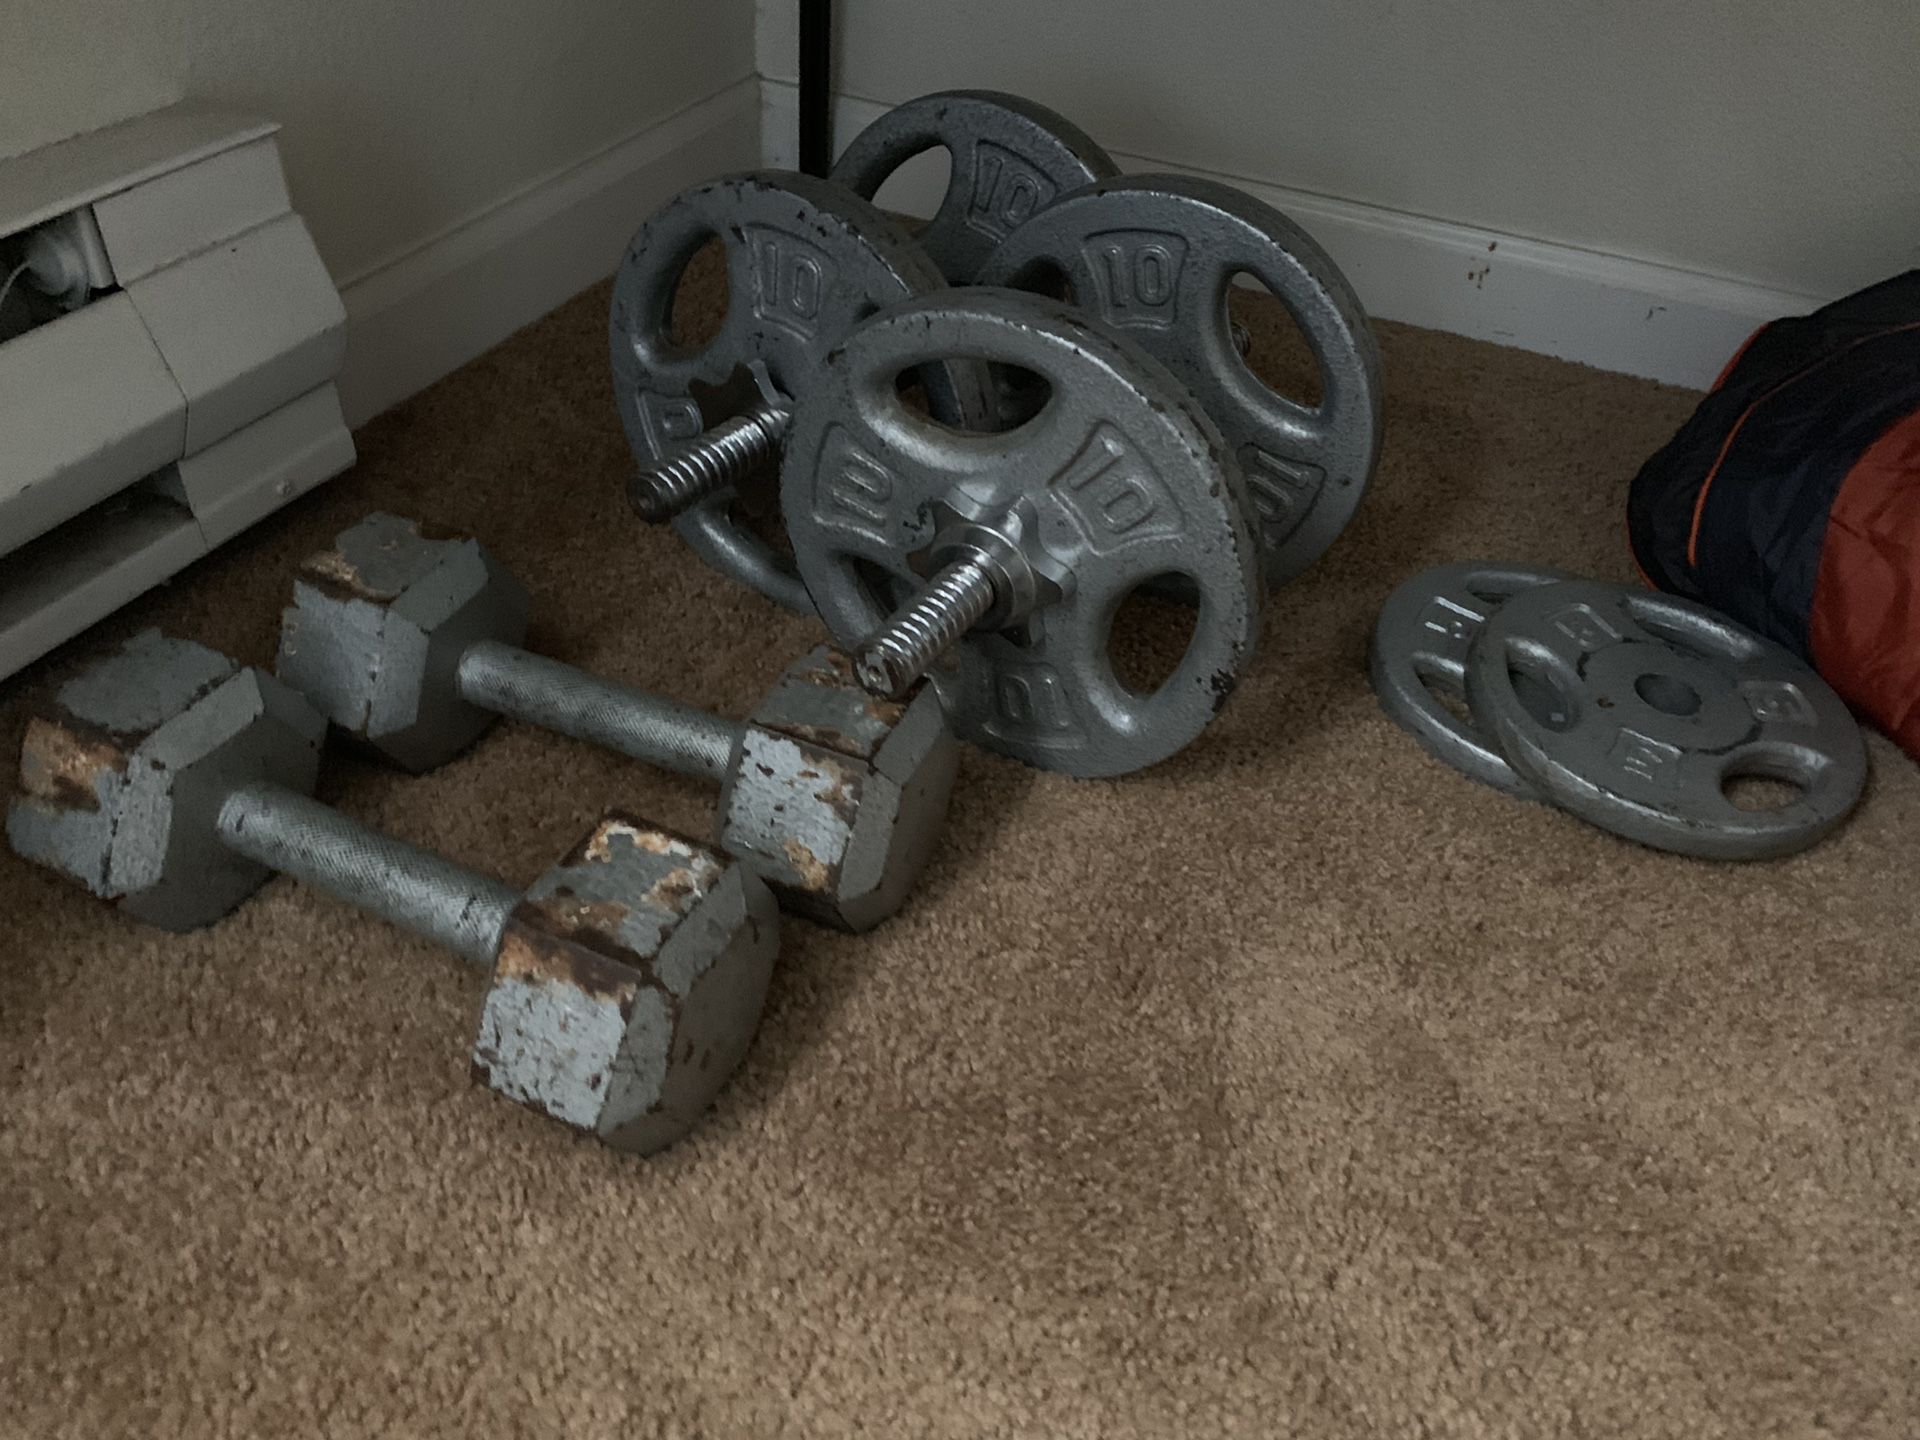 Assorted free weights